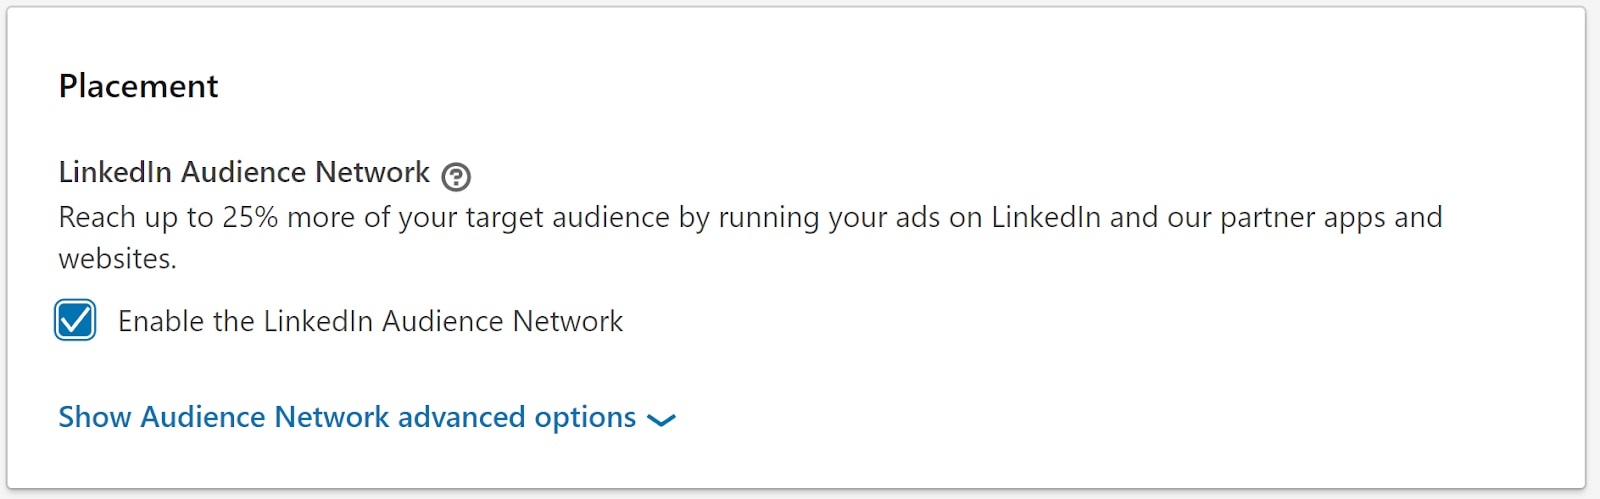 LinkedIn advertising placement.